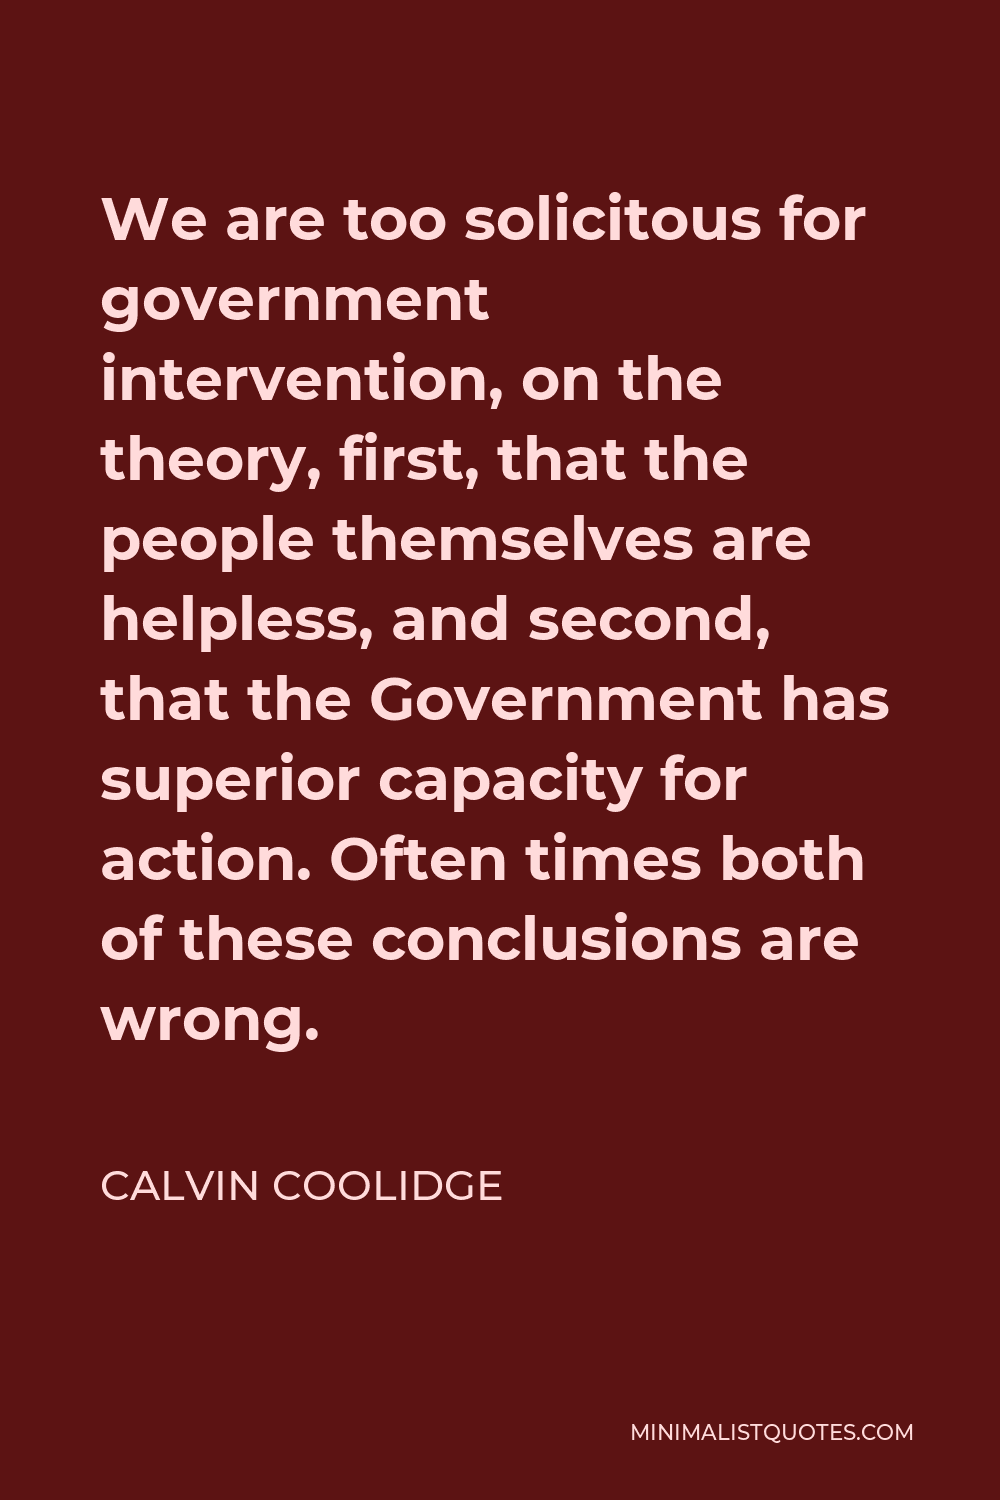 Calvin Coolidge Quote - We are too solicitous for government intervention, on the theory, first, that the people themselves are helpless, and second, that the Government has superior capacity for action. Often times both of these conclusions are wrong.